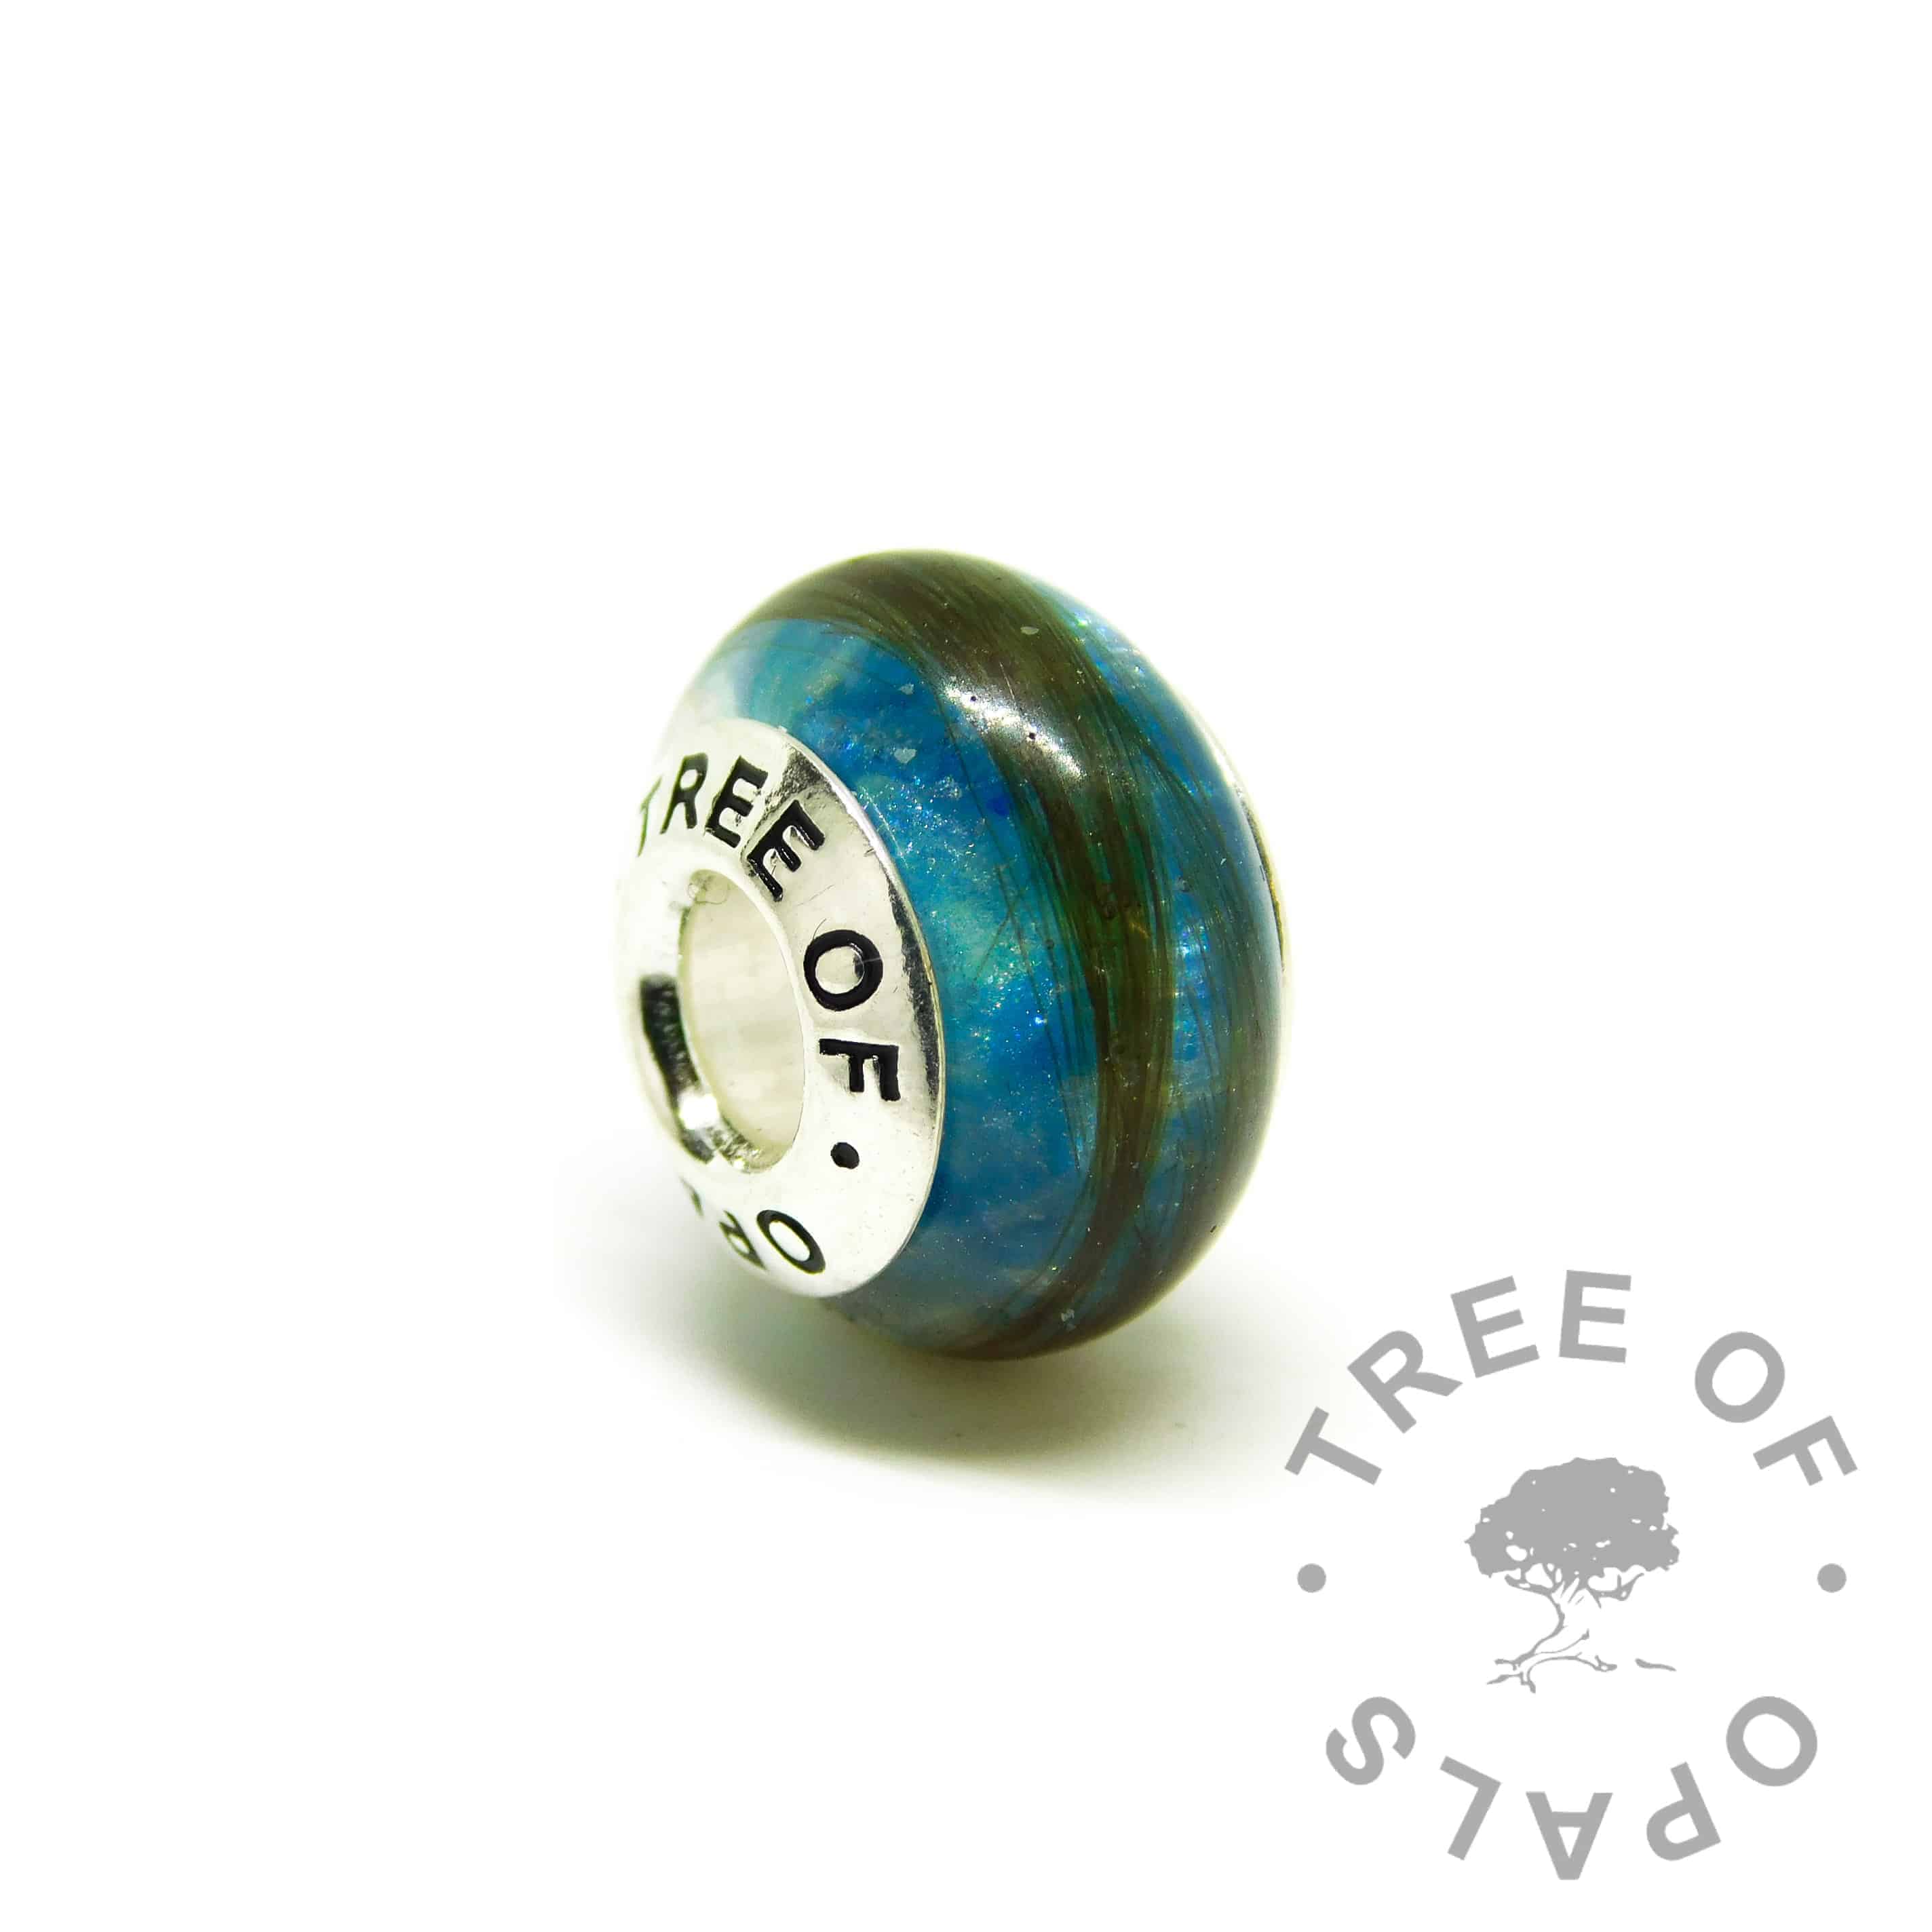 hair jewellery blue charm, strawberry blonde hair with Aegean blue resin sparkle mix. Tree of Opals branded core charm bead fits on Pandora bracelets